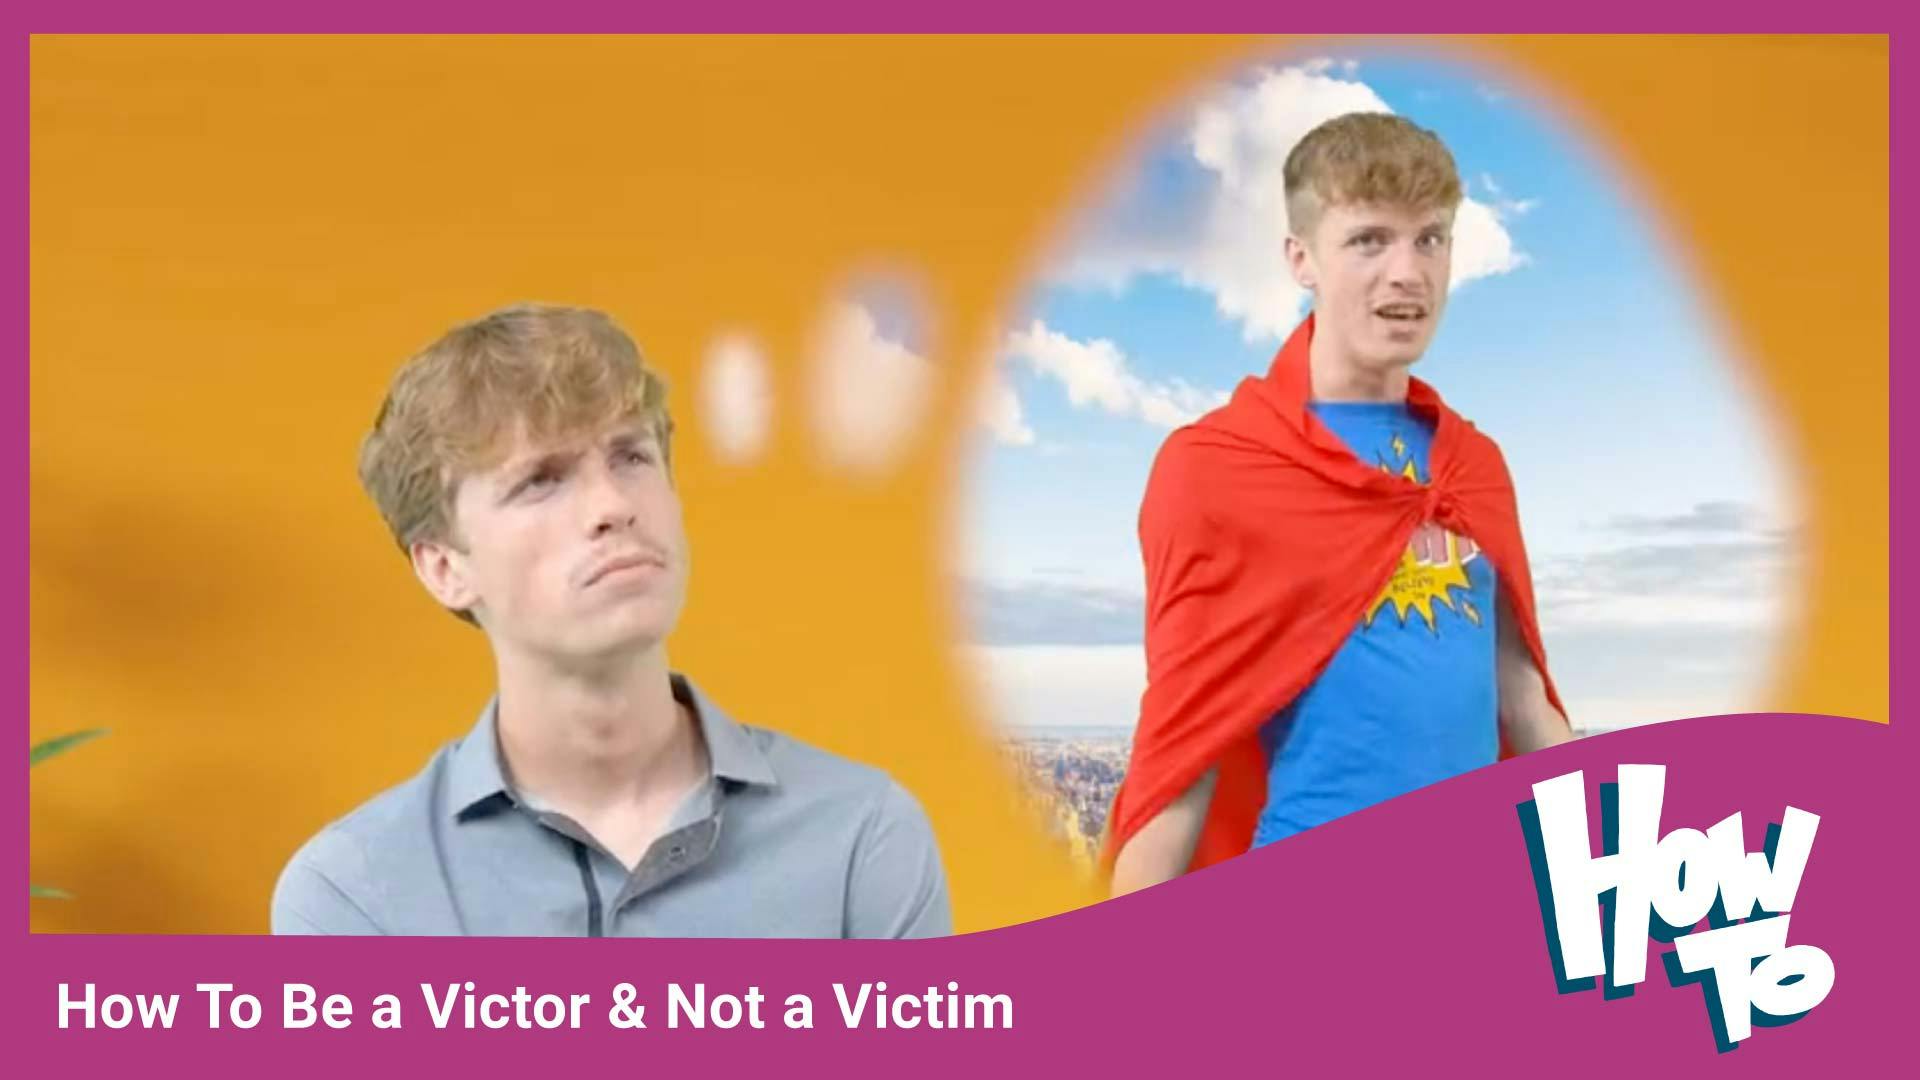 How To Be a Victor & Not a Victim